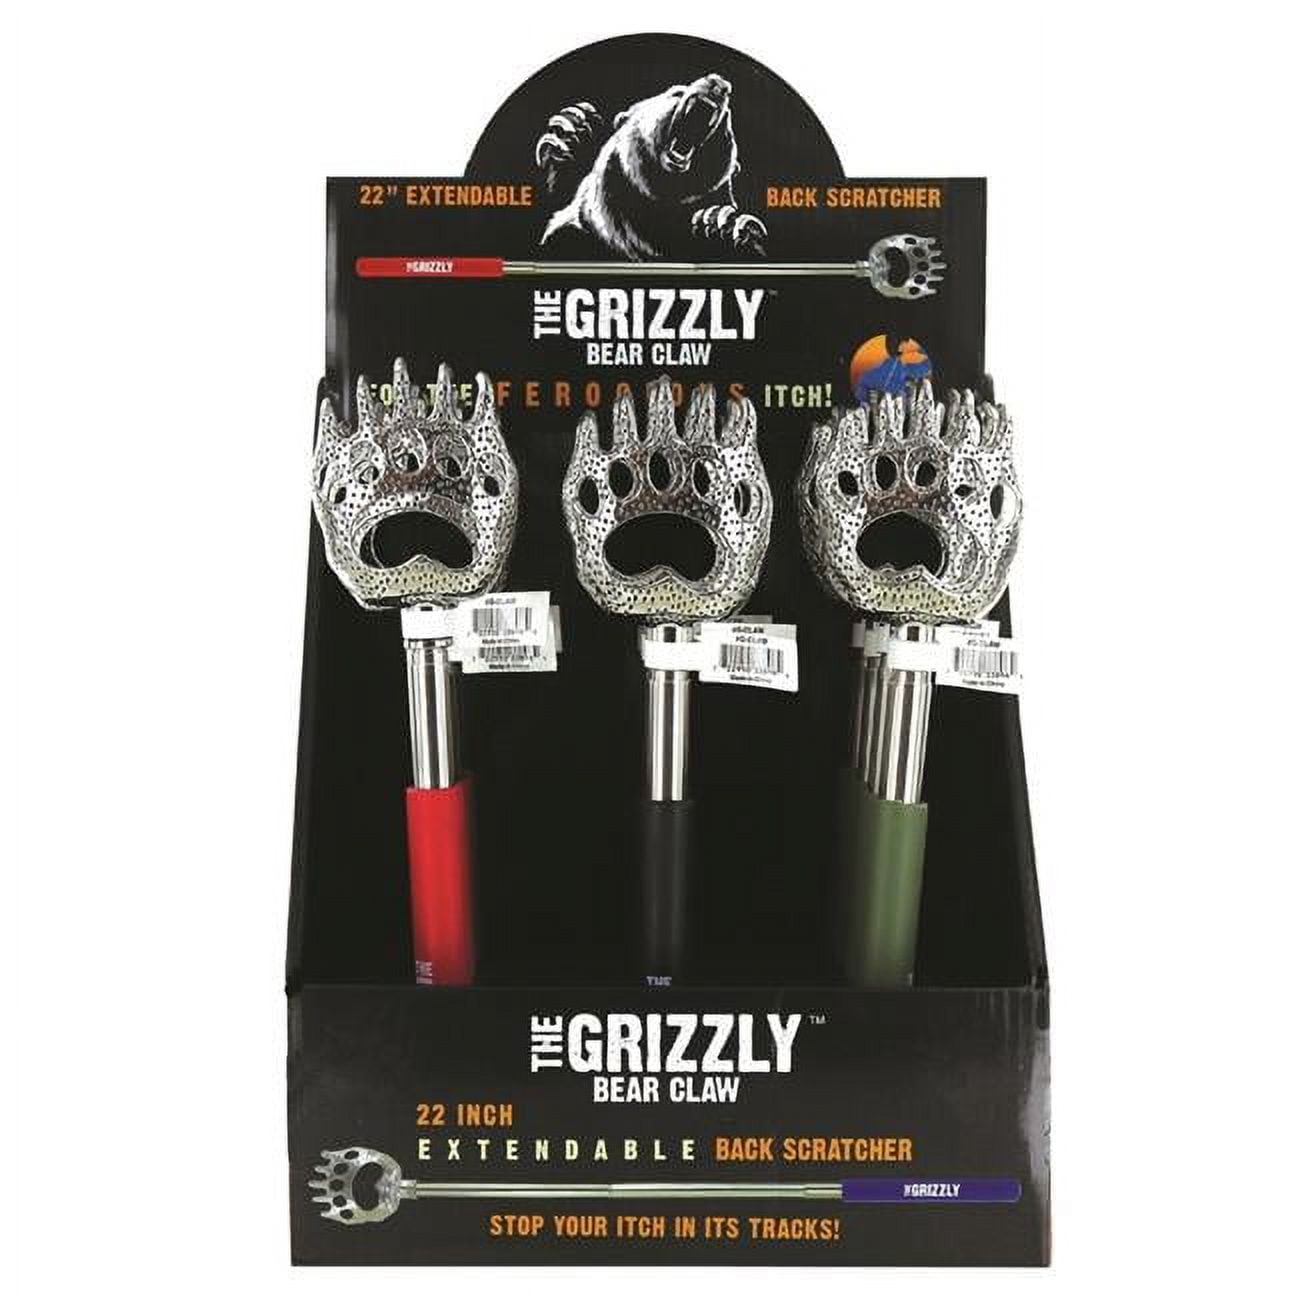 Picture of DDI 2345832 The Grizzly Bear Claw Back Scratcher Case of 24